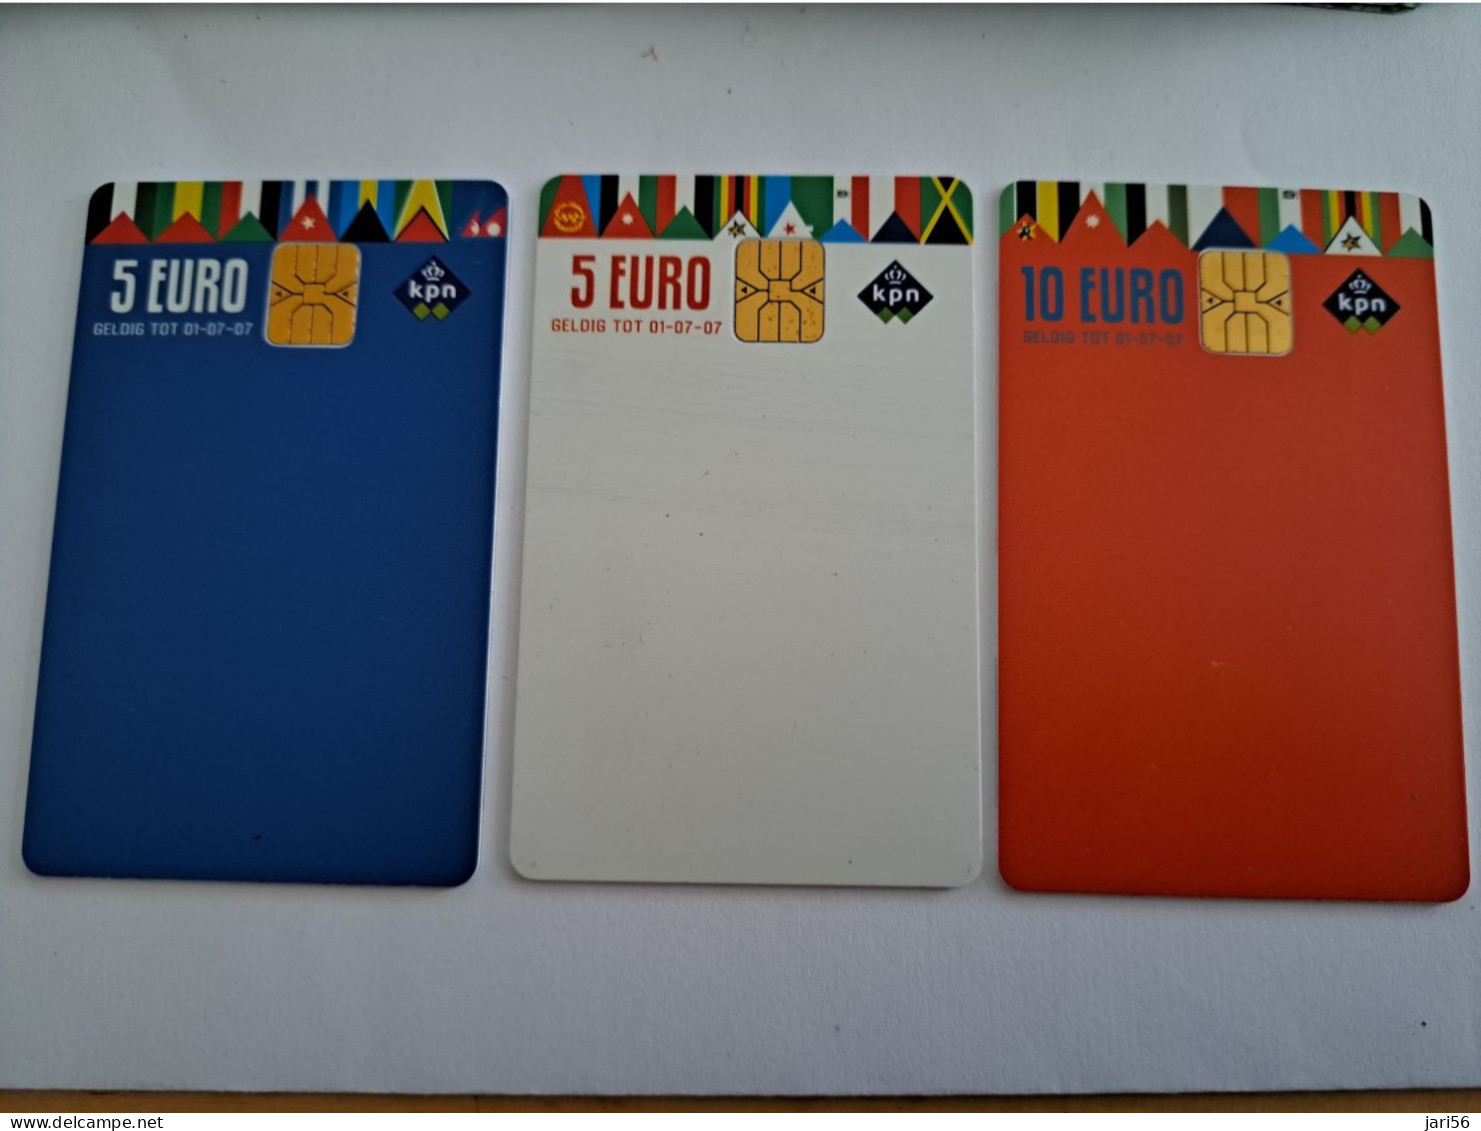 NETHERLANDS CHIPCARD  2X CARD  5 EURO / 1X 10 EURO /  FLAGS OF MANY COUNTRYS     /  USED   Cards  ** 15735 ** - Publiques